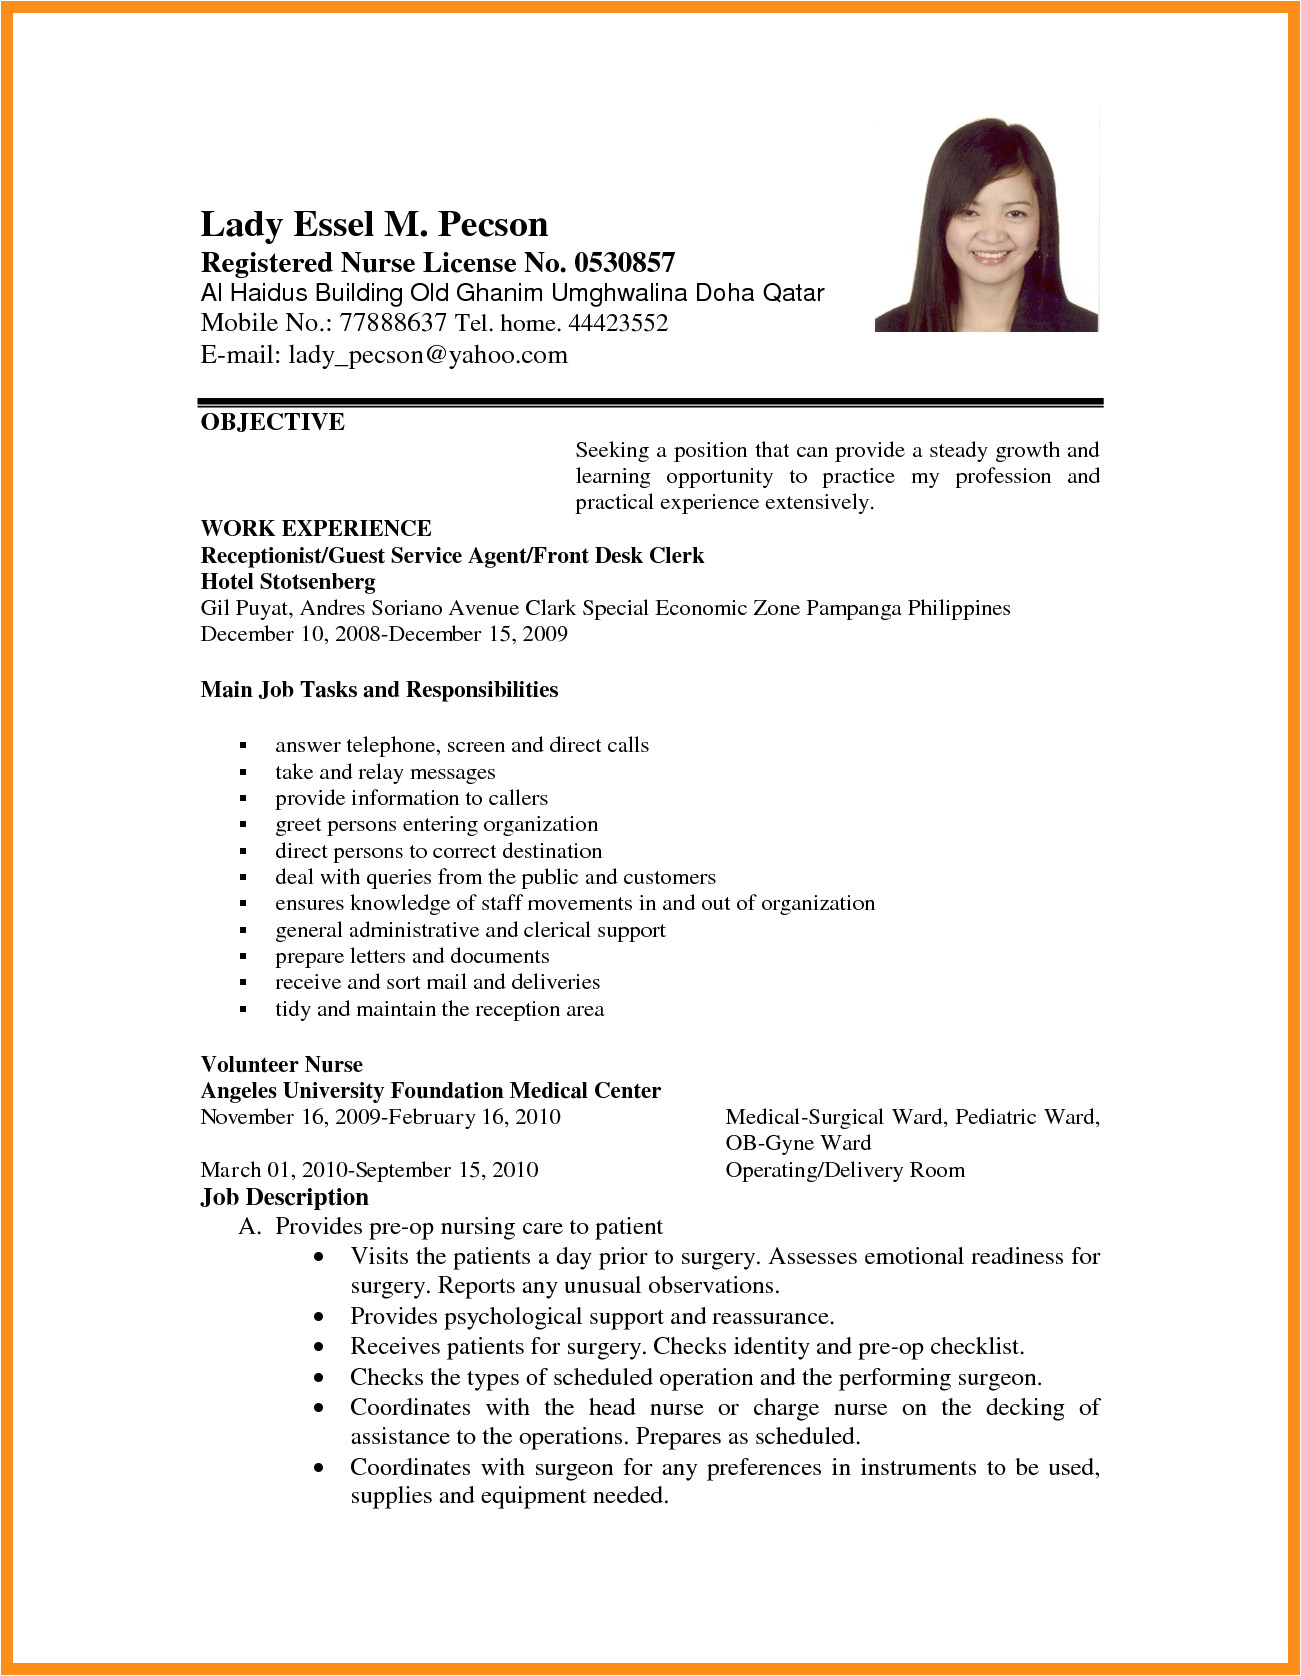 sample resume objective for job interview